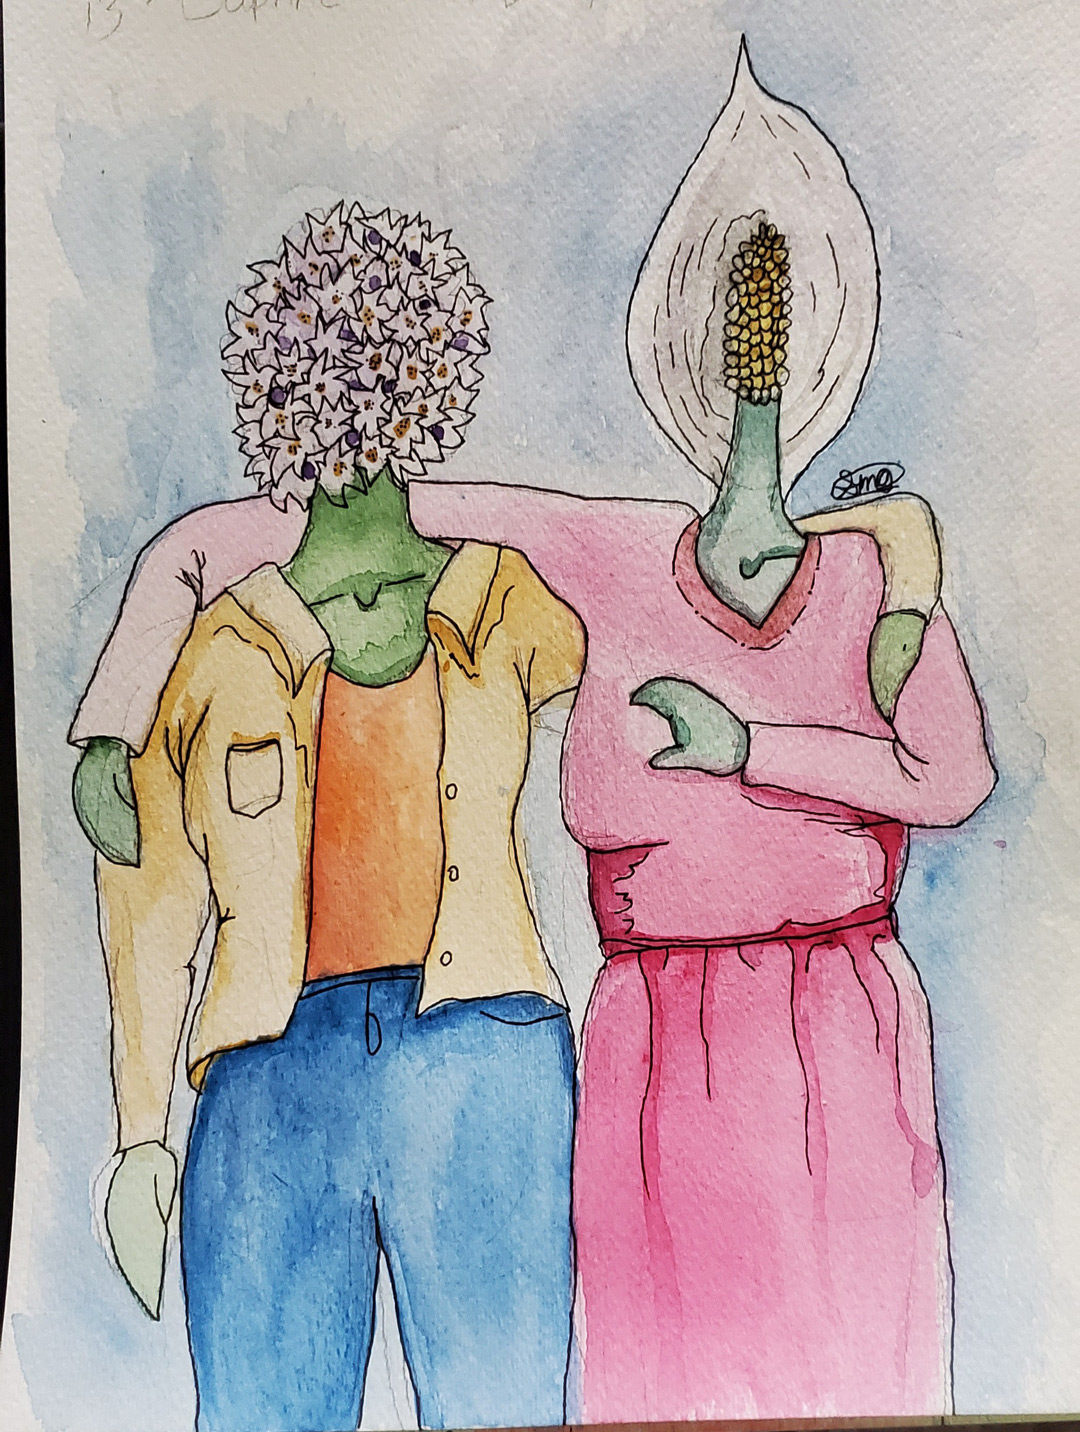 A plant woman with a lily head hugs another plant woman. They both wear modern clothing.